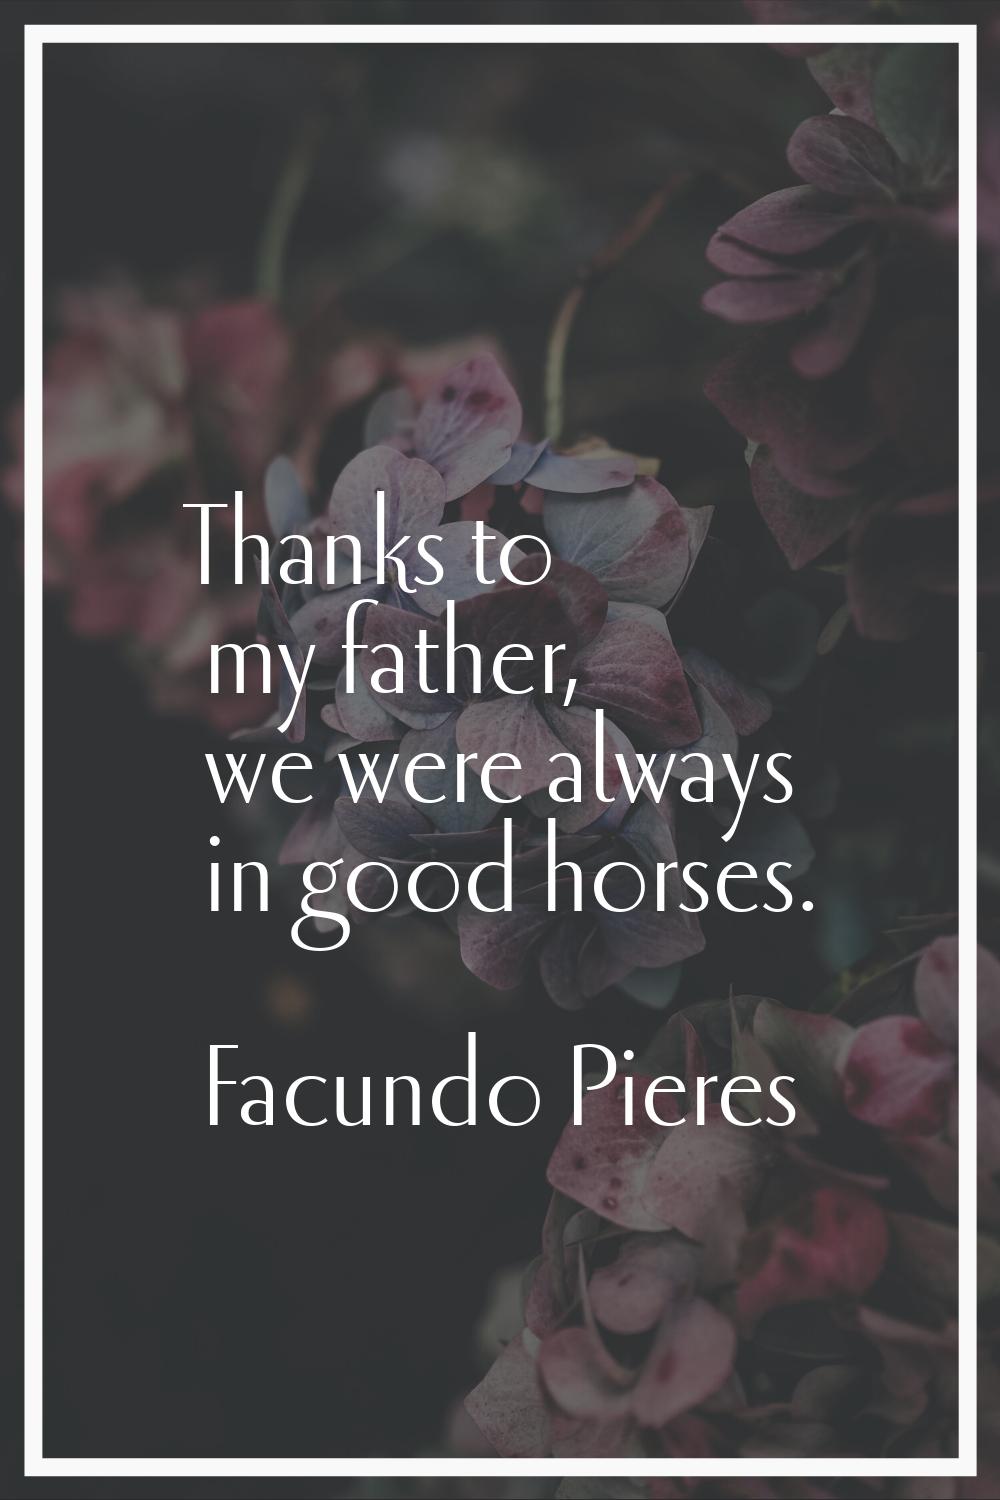 Thanks to my father, we were always in good horses.